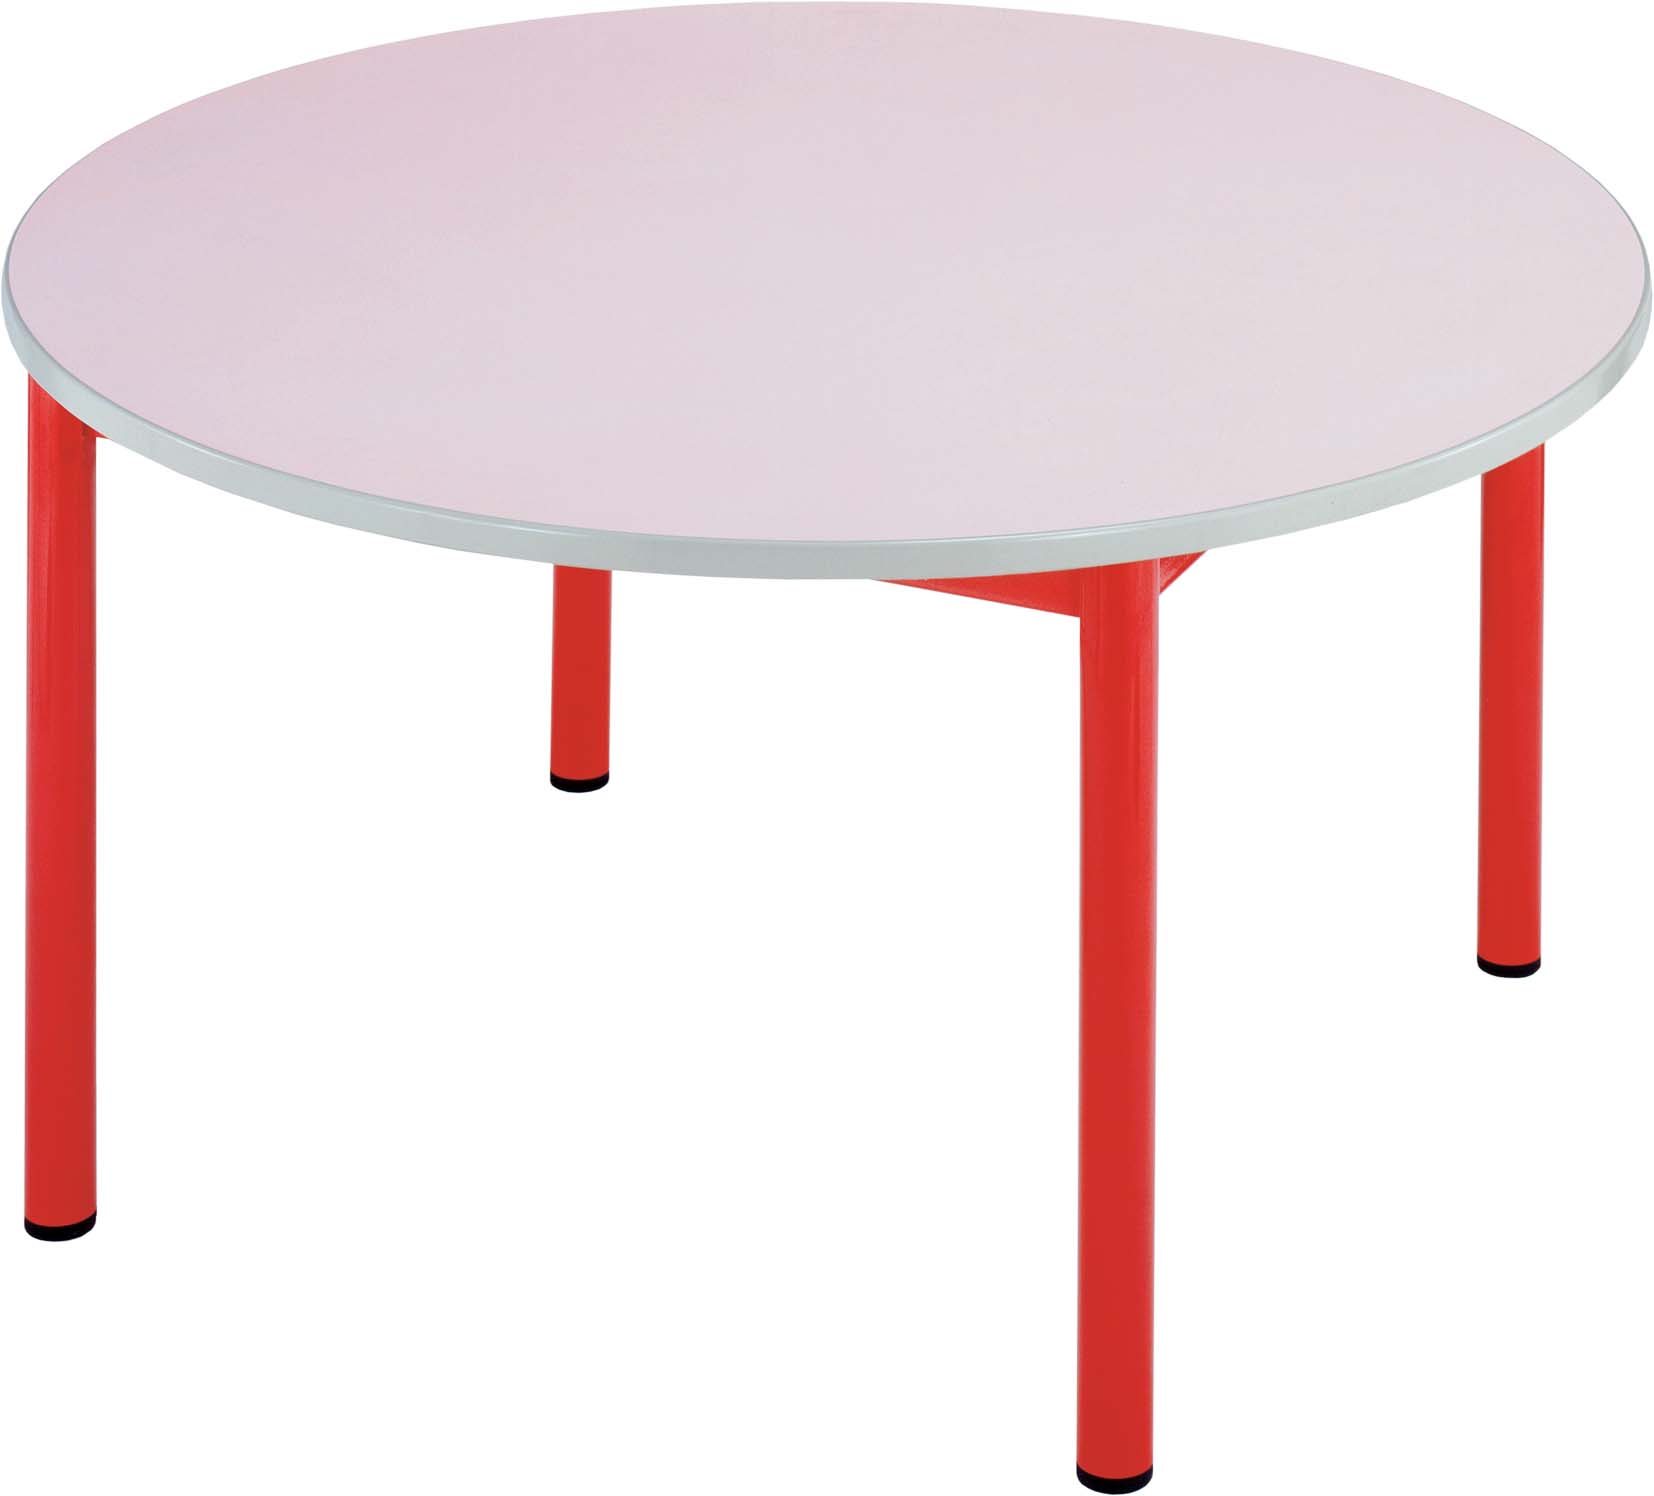 Table maternelle fixe Ronde - photo 2